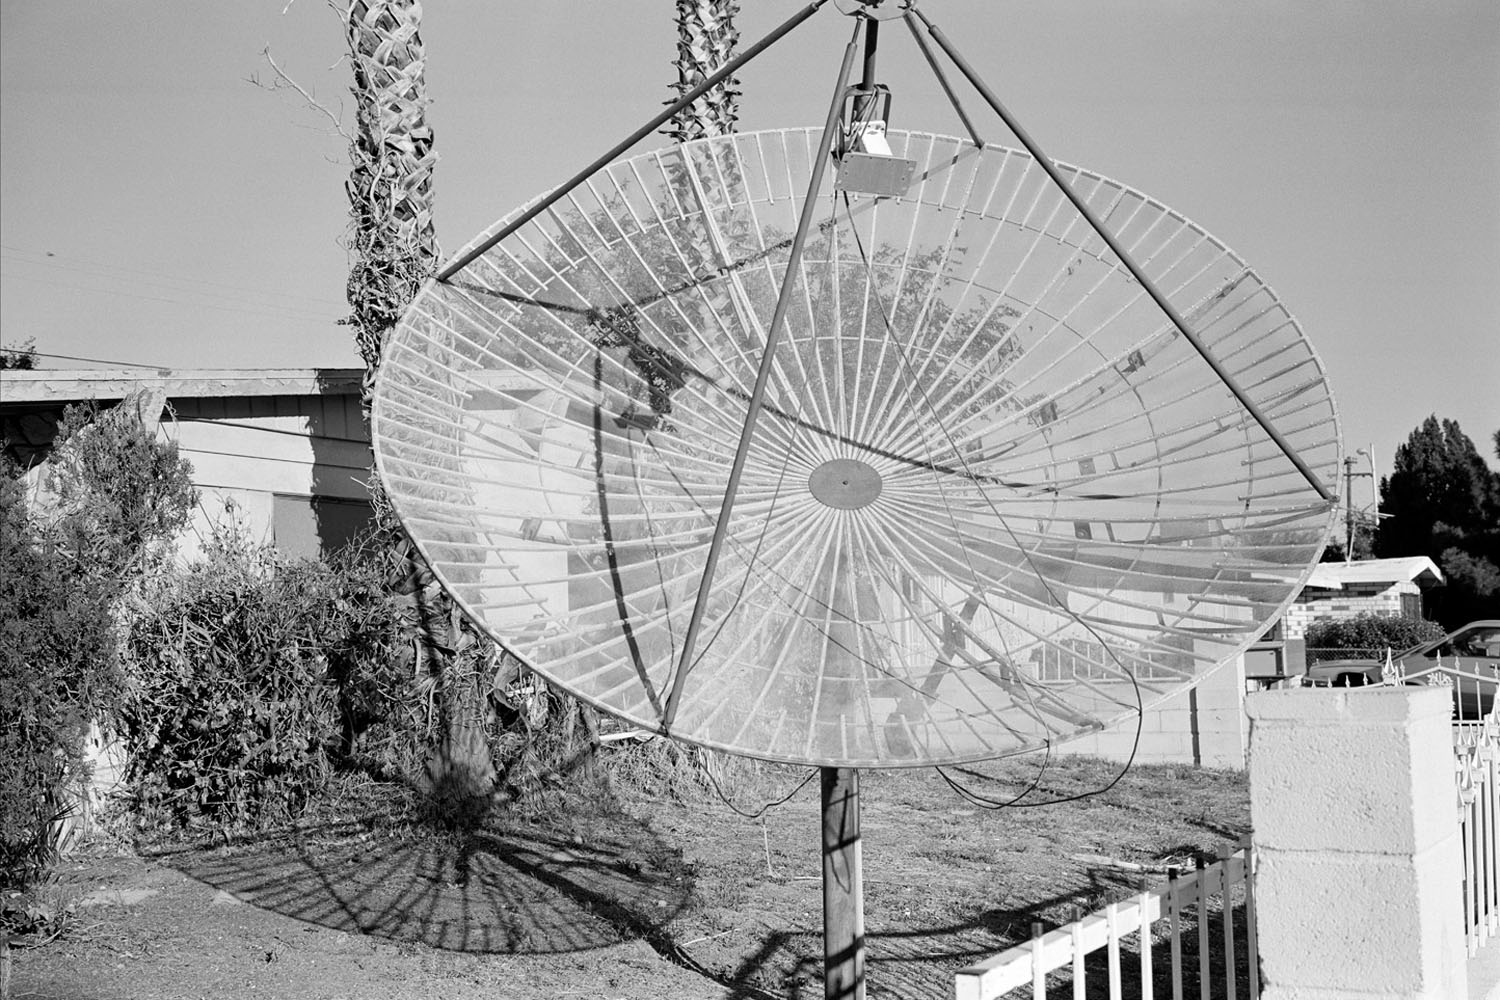 USA. Las Vegas, Nevada. November, 2011. Satellite dish in front of a foreclosed house.